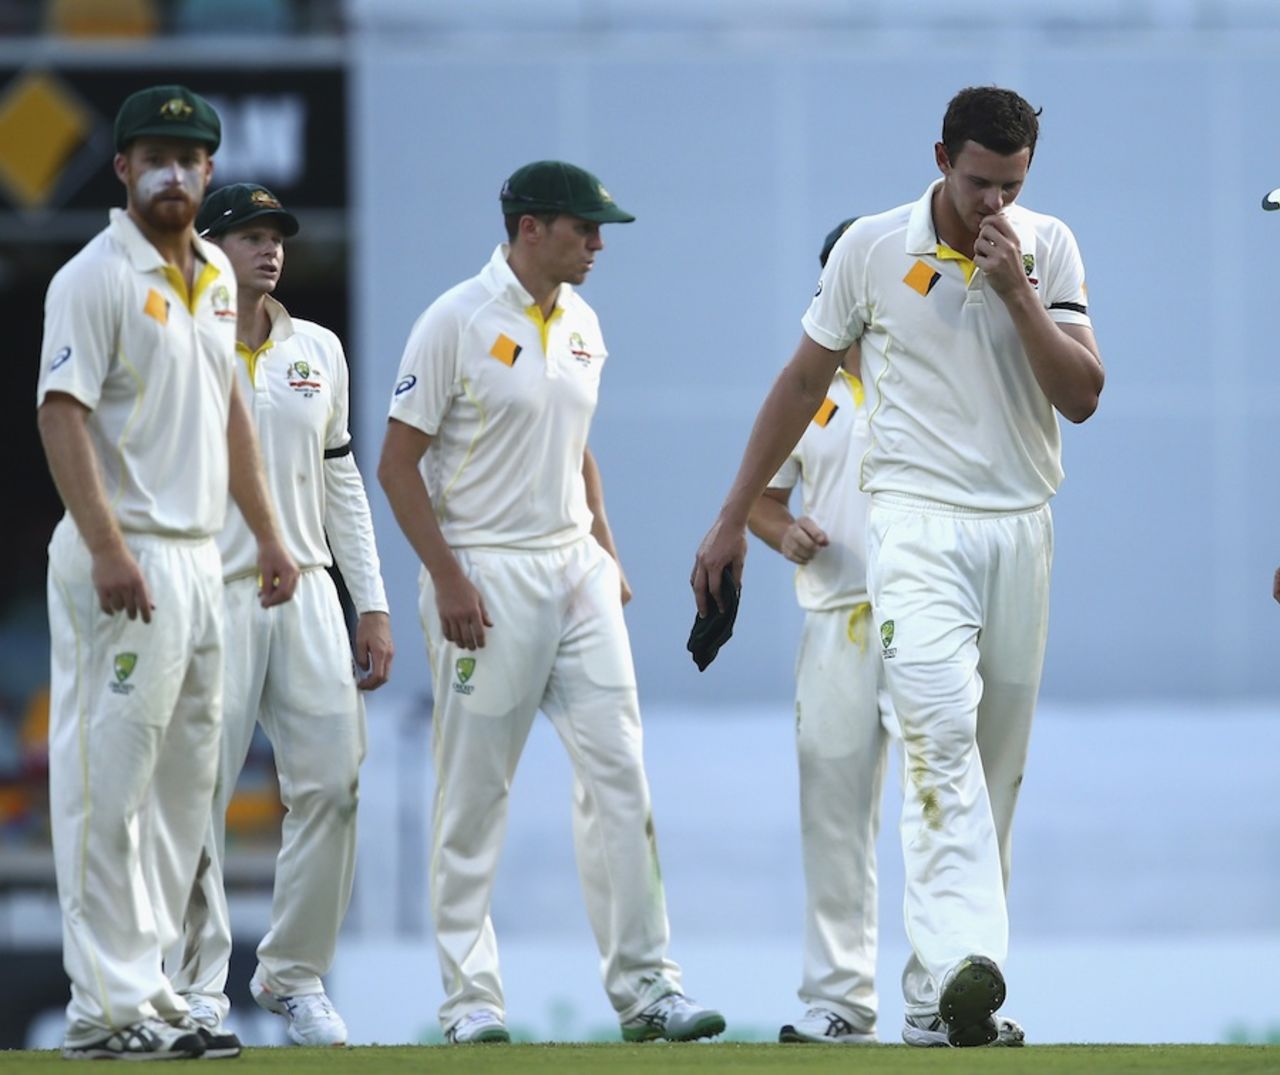 Josh Hazlewood left the field late in the day in discomfort, Australia v India, 2nd Test, Brisbane, 1st day, December 17, 2014